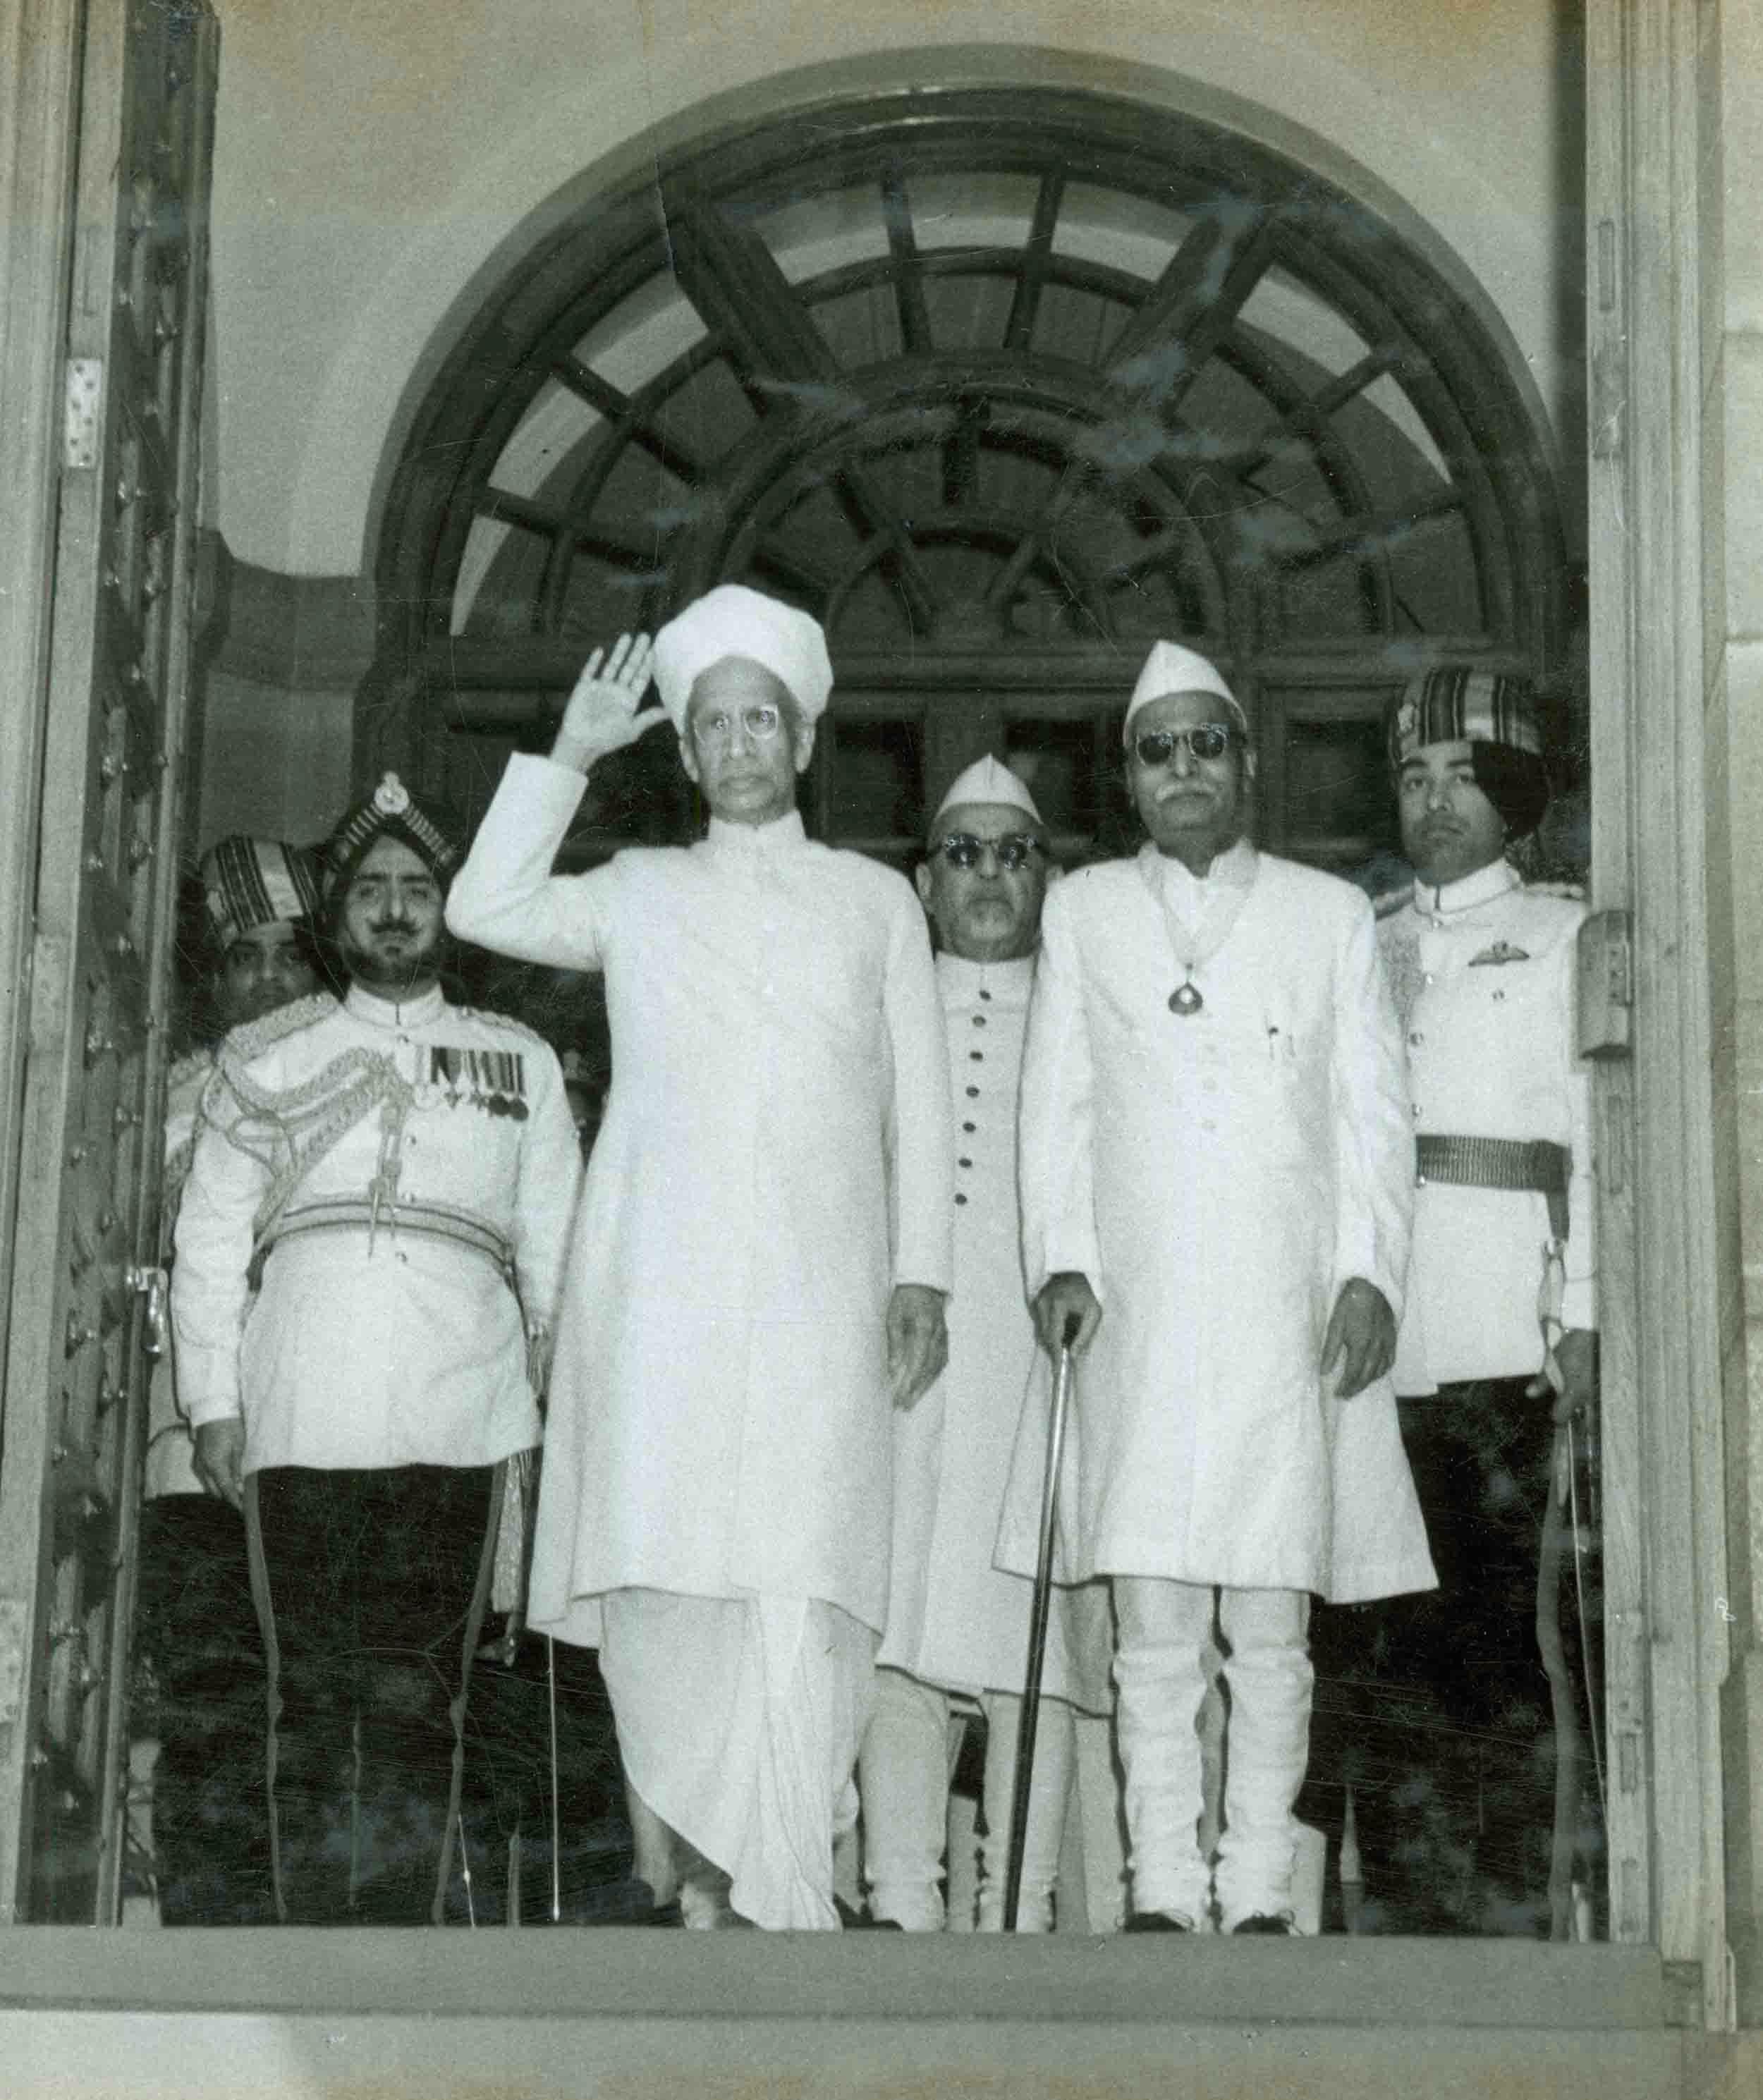 Dr Sarvepalli Radhakrishnan - 13 May 1962 to 13 May 1967
Dr Radhakrishnan was the second president of India.  He was also the first vice-president of India from 1952 to 1962 and his birthday which falls on September 5 is celebrated as Teacher's Day